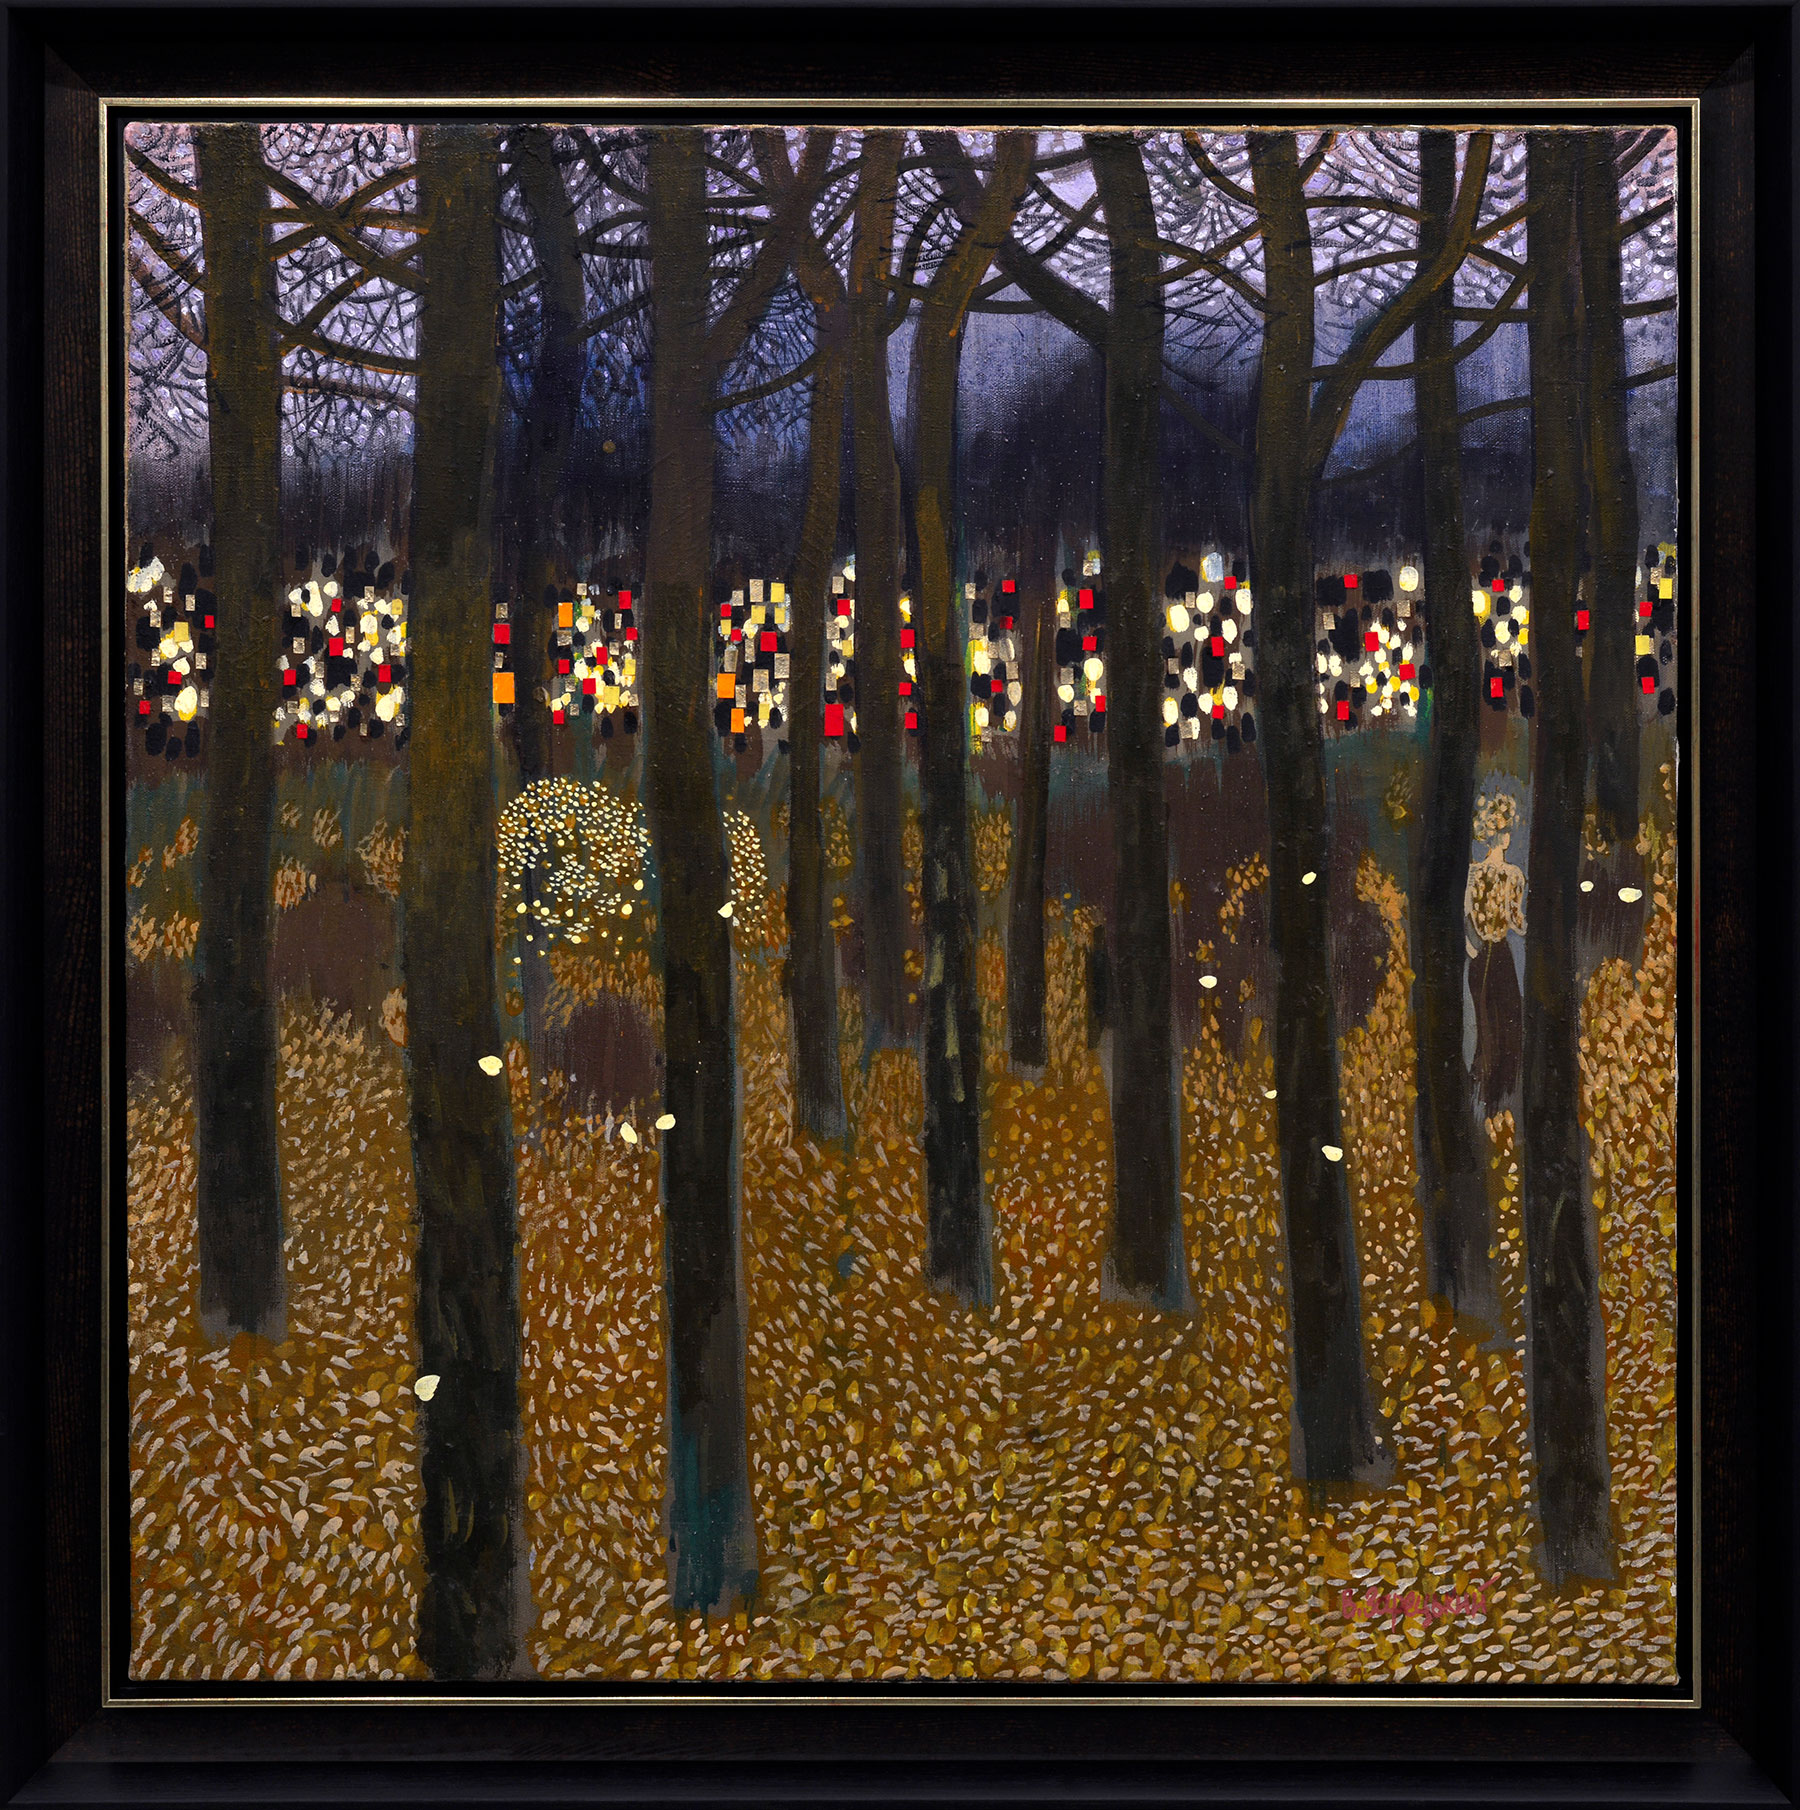 "Behind the Woods - Music", 1985 - 2